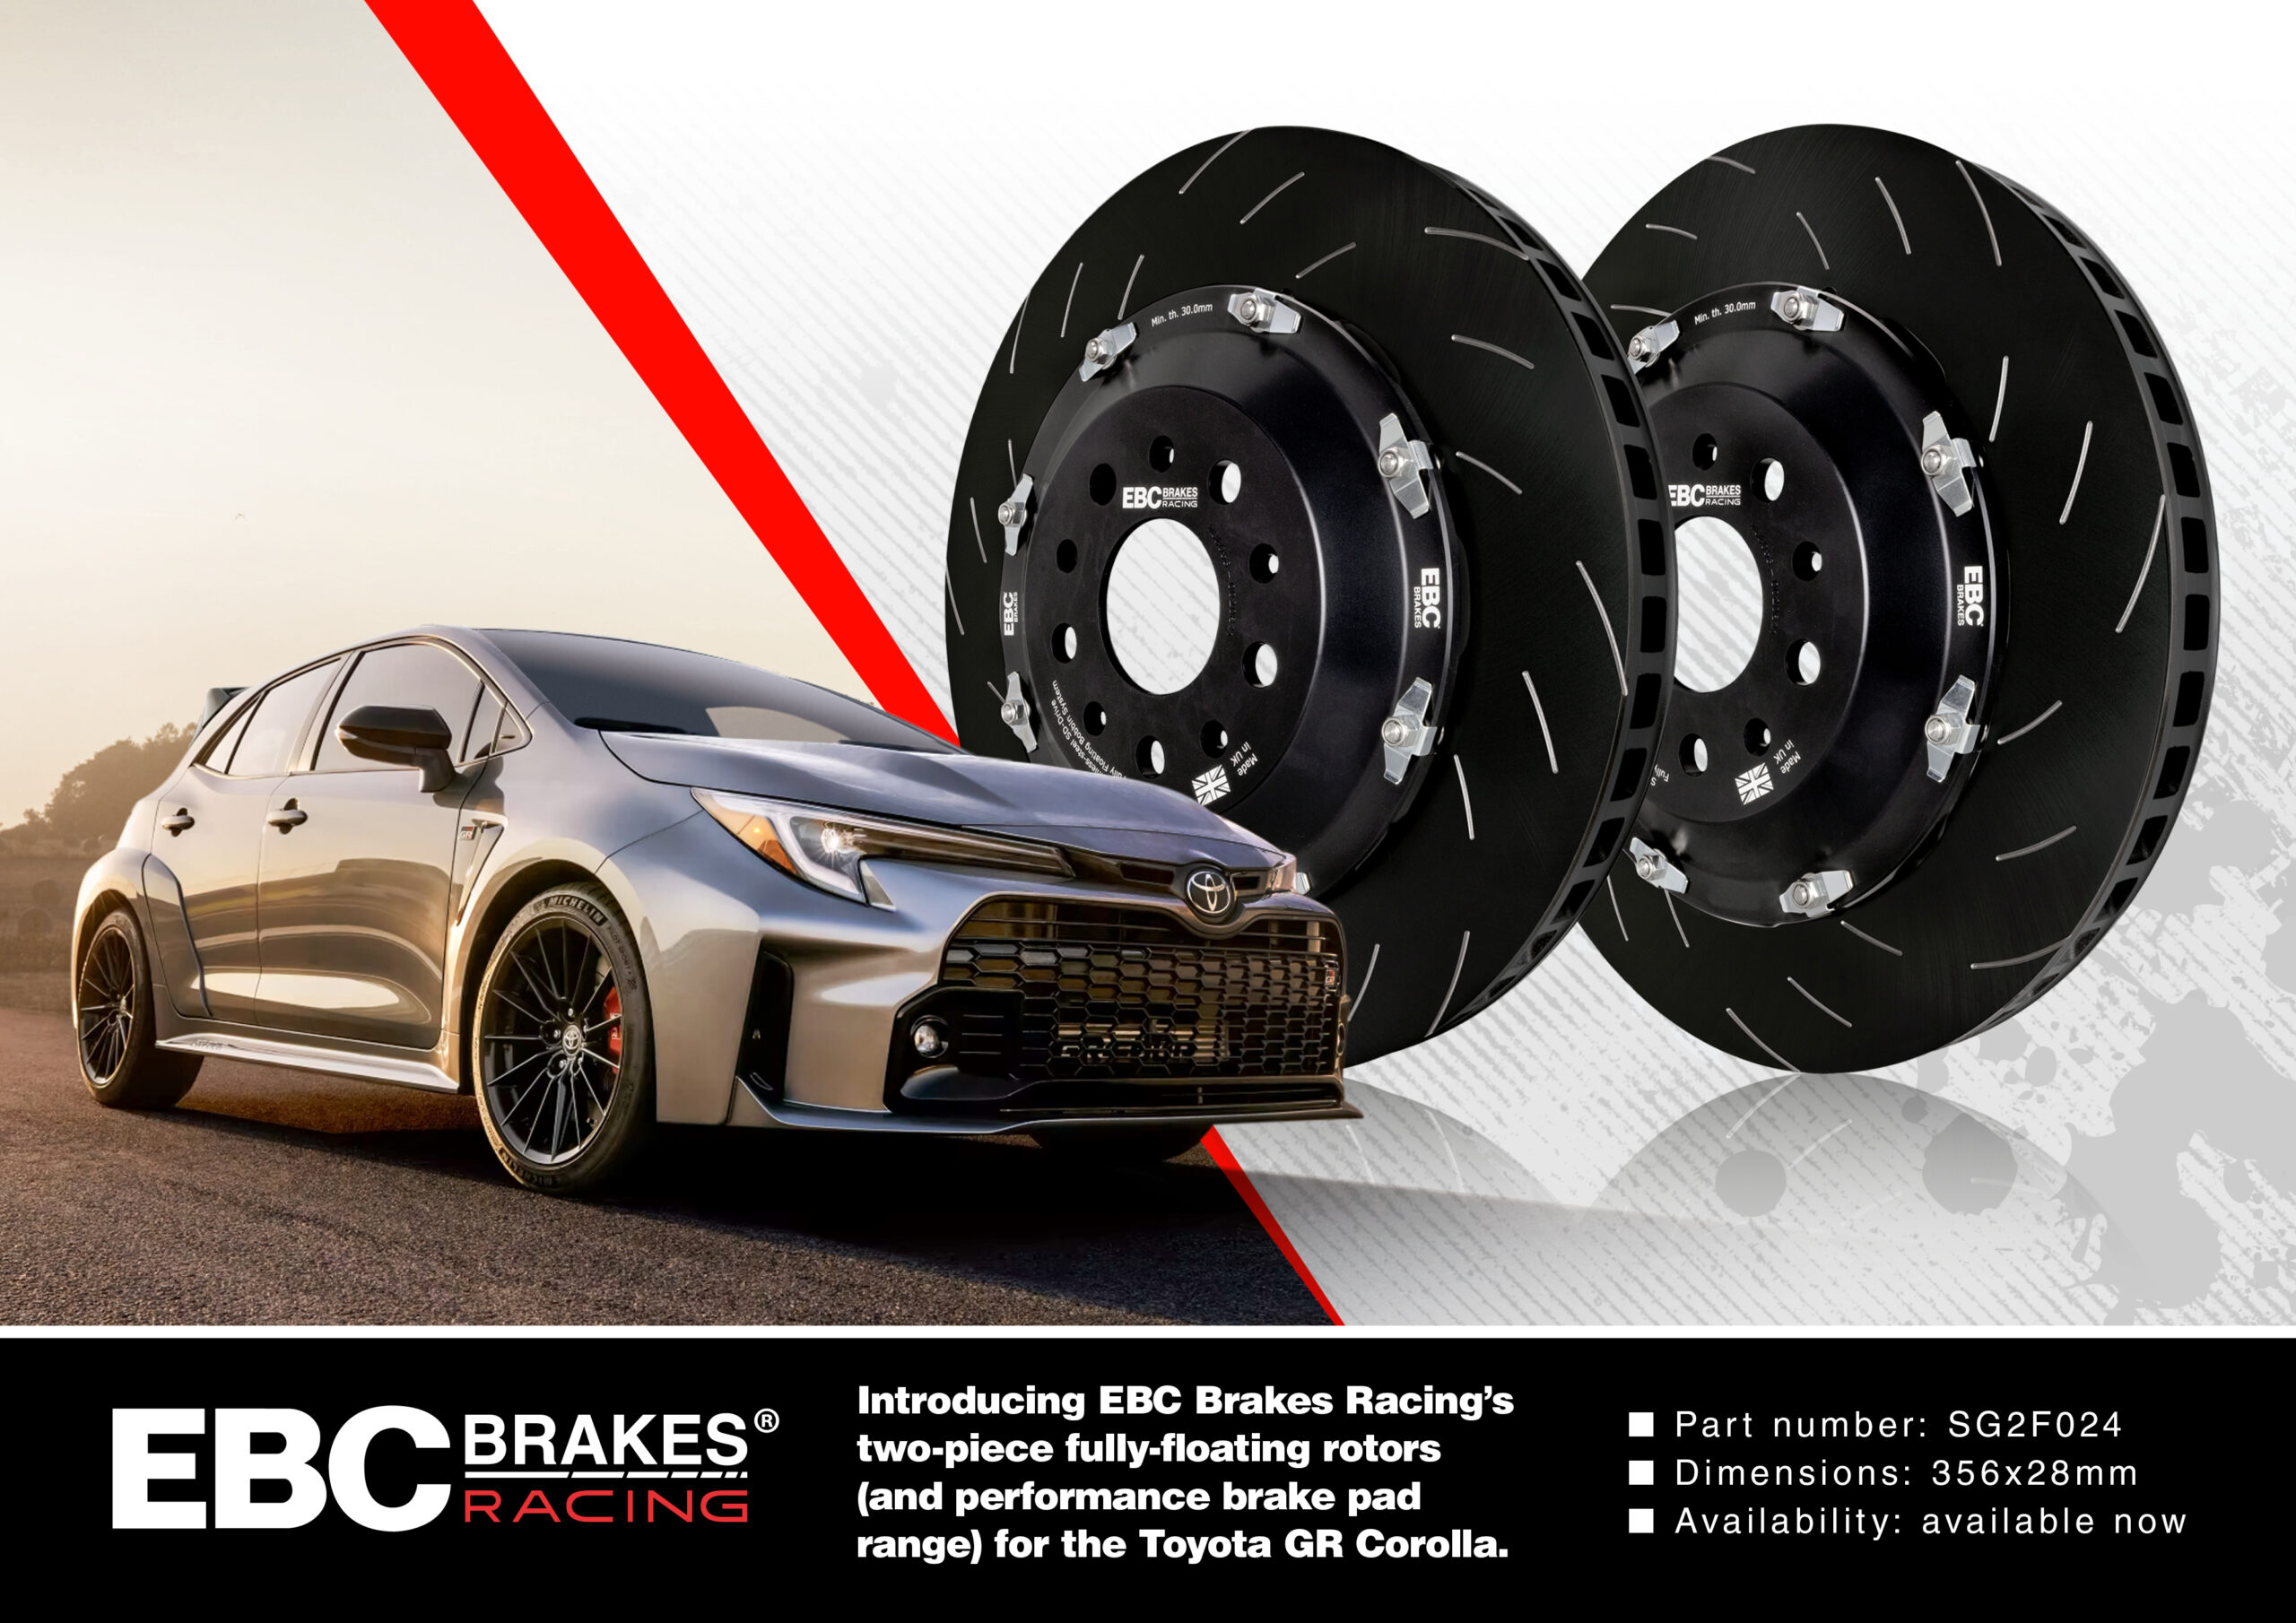 Now Available: EBC High-Performance Brake Rotor and Pad Upgrades for Toyota GR Corolla